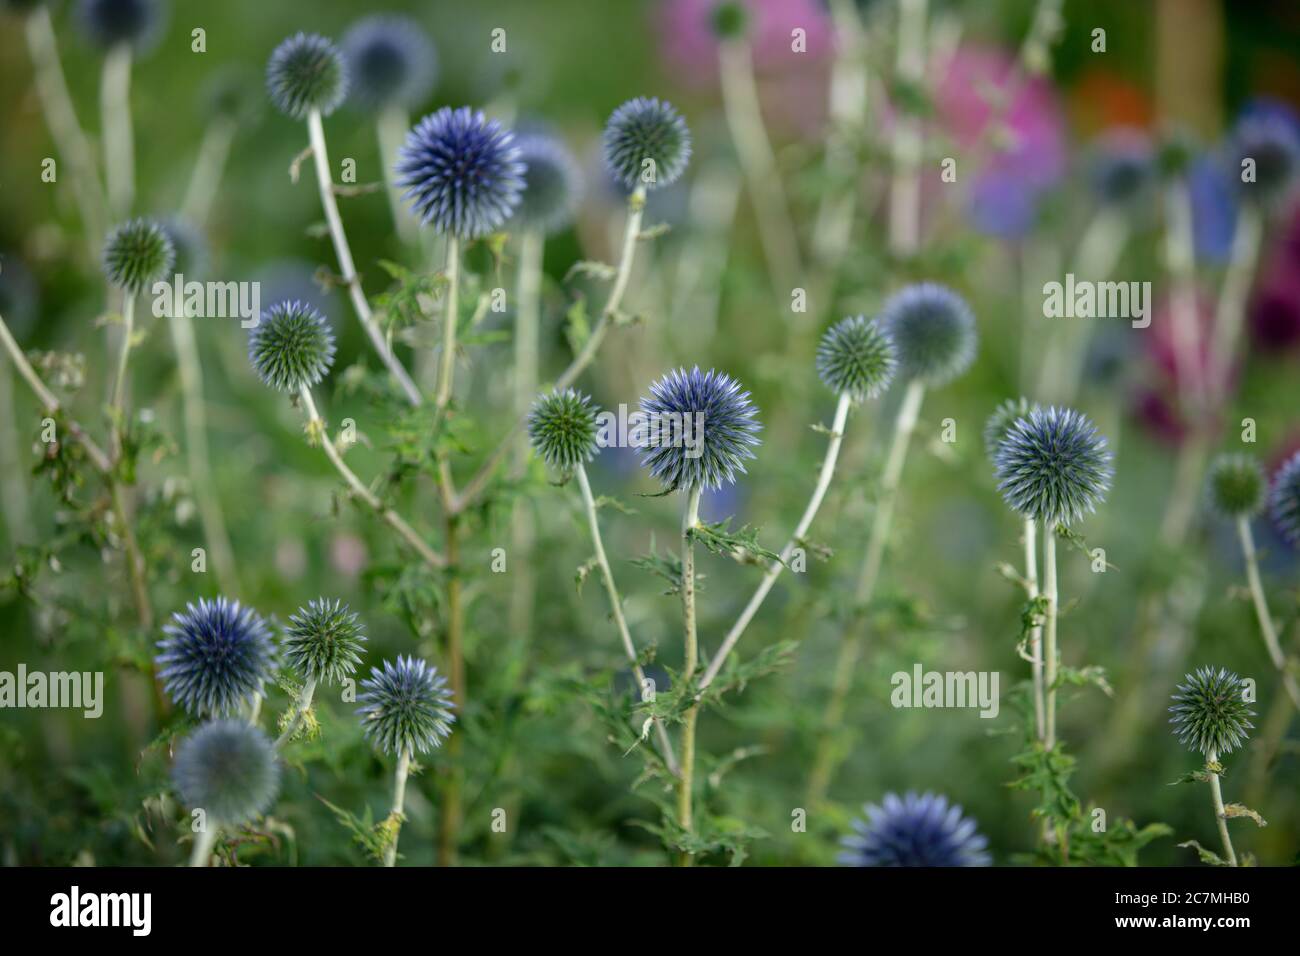 Close up of the metallic blue flowering Echinops ritro with globe flowers seen in July in the garden. Stock Photo